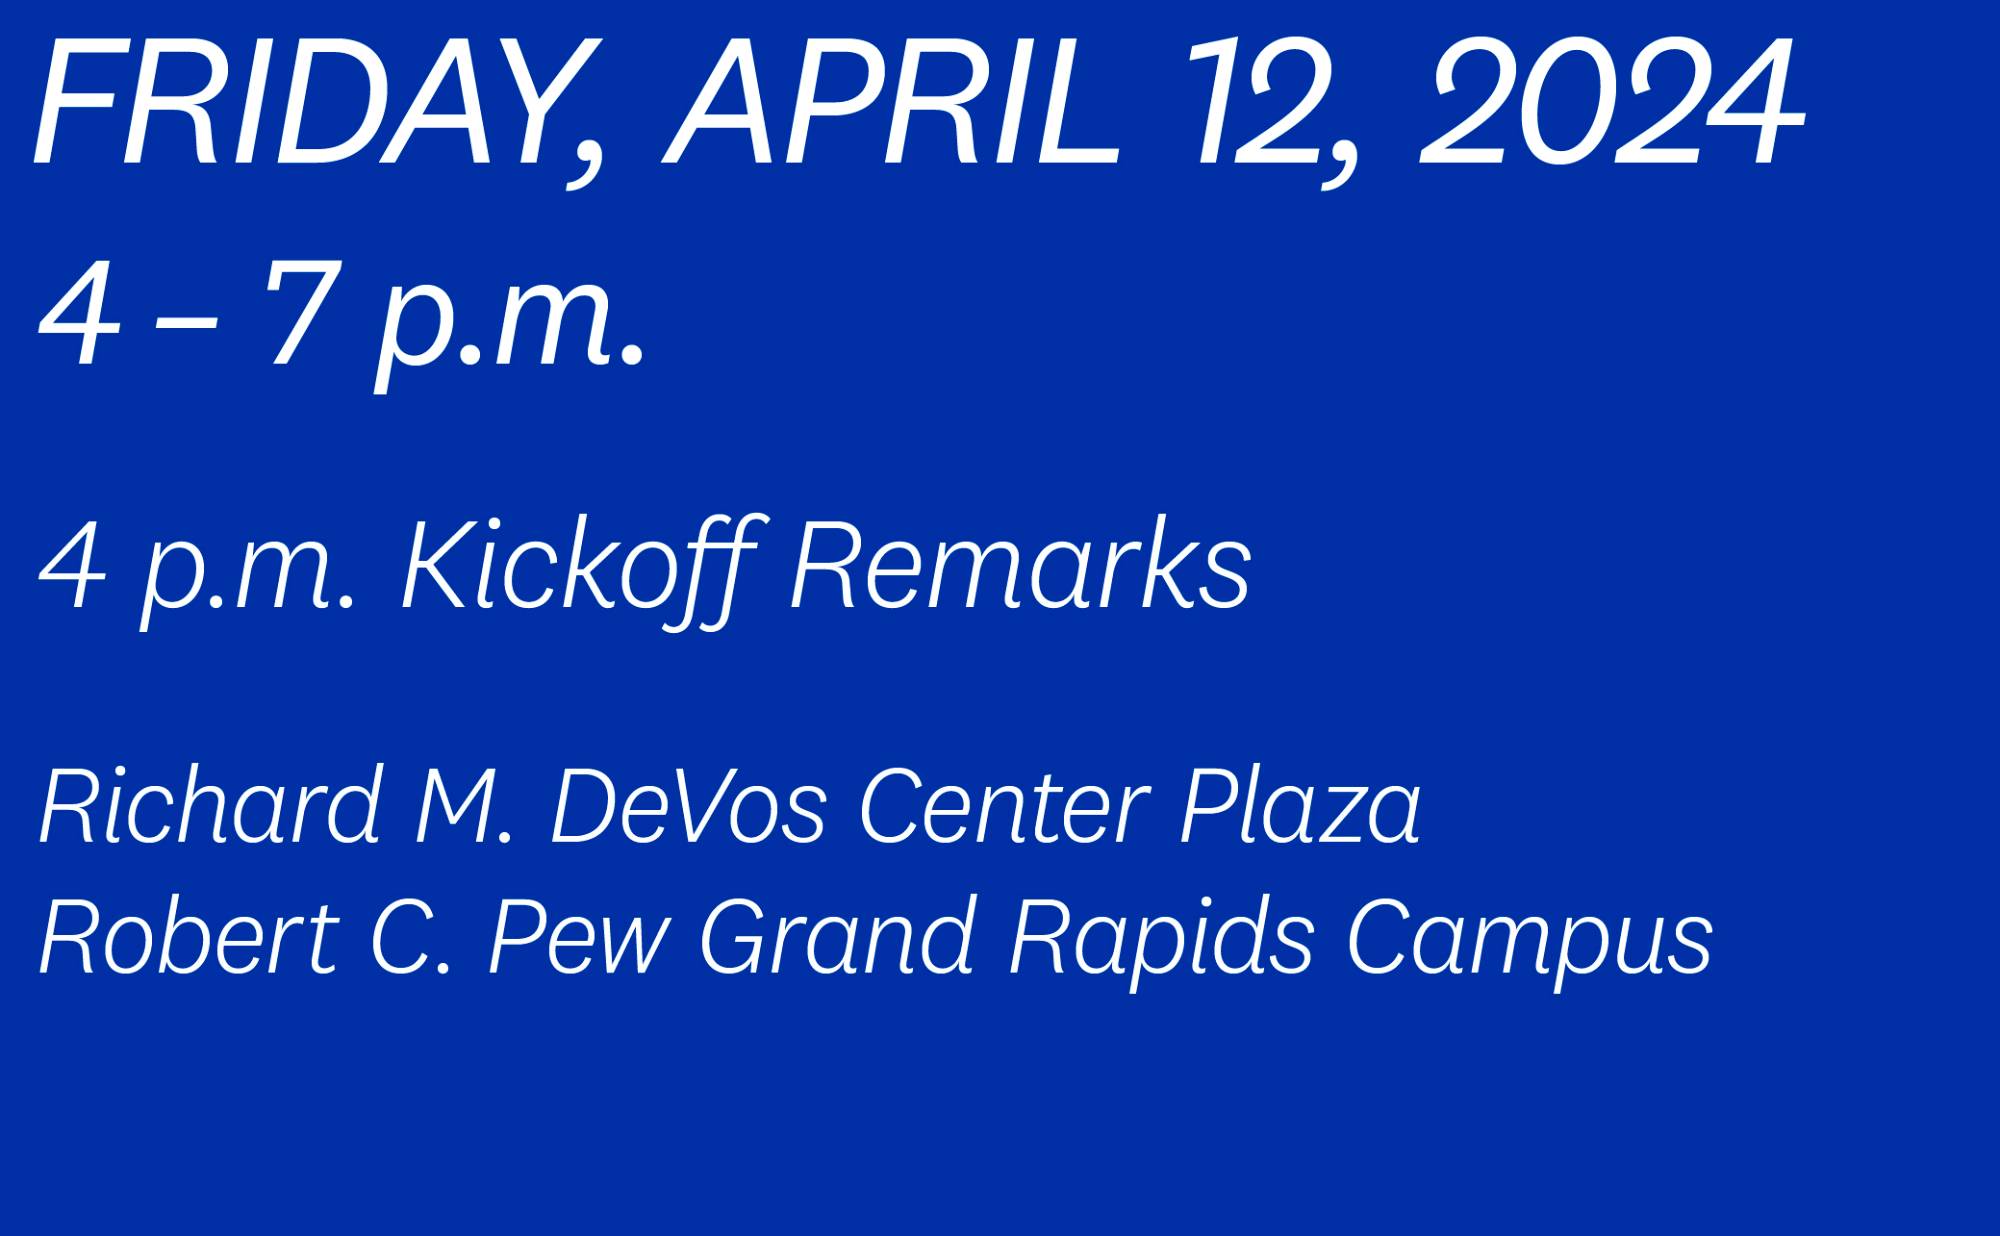 Friday, April 12, 2024, 4&#8211;7 p.m., 4 p.m. Kickoff Remarks, at the Richard M. DeVos Center Plaza on the Robert C. Pew Grand Rapids Campus